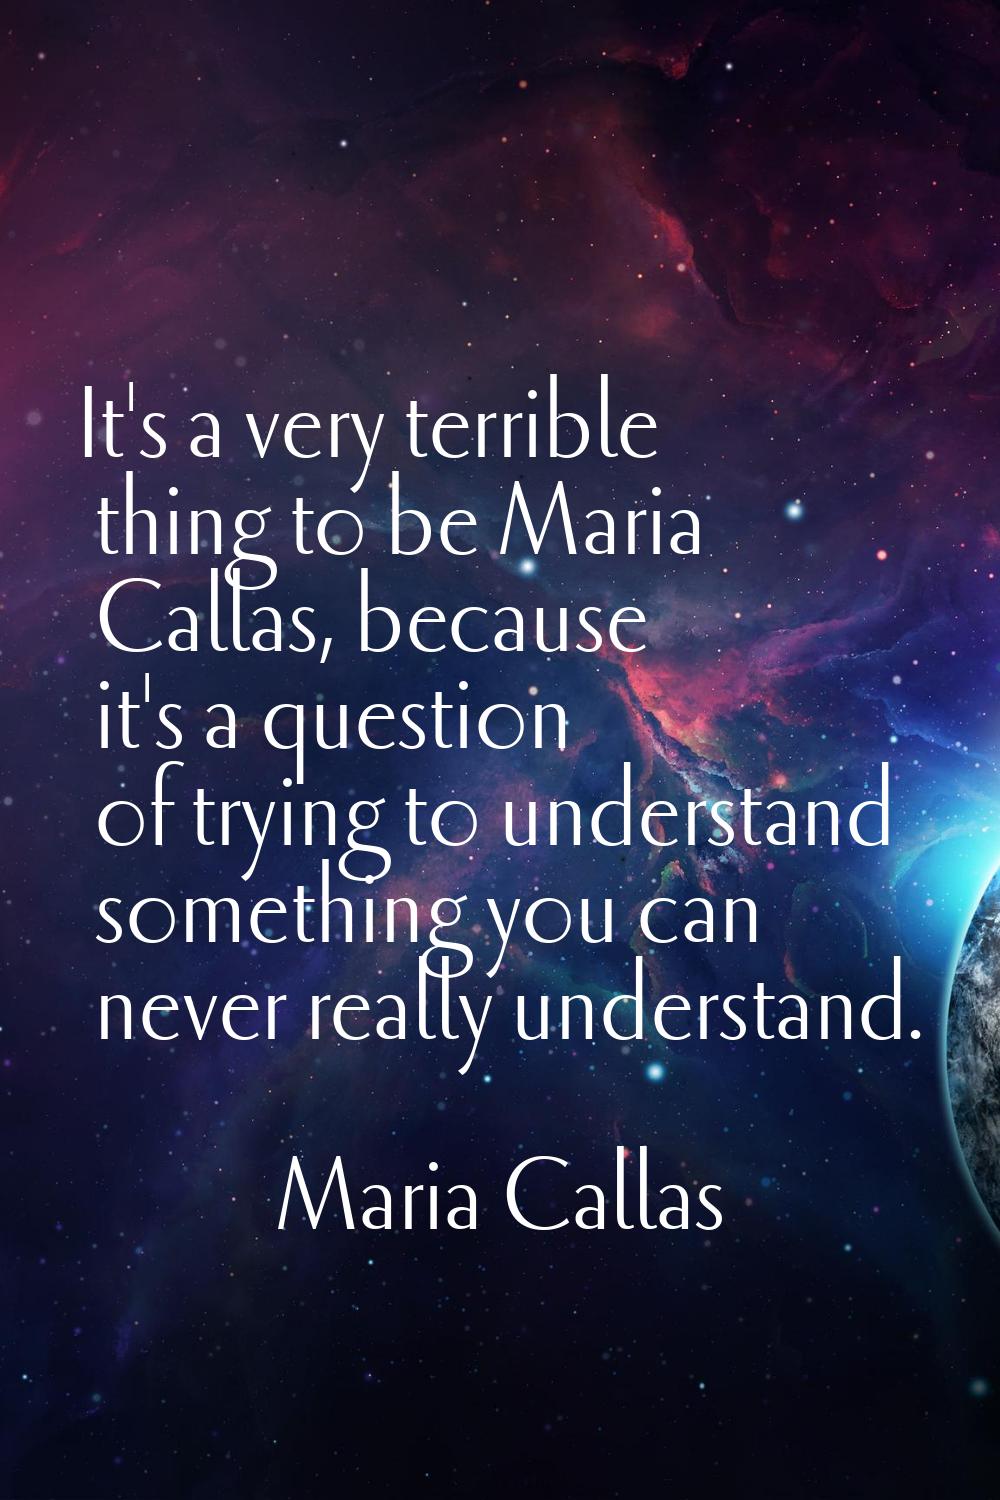 It's a very terrible thing to be Maria Callas, because it's a question of trying to understand some